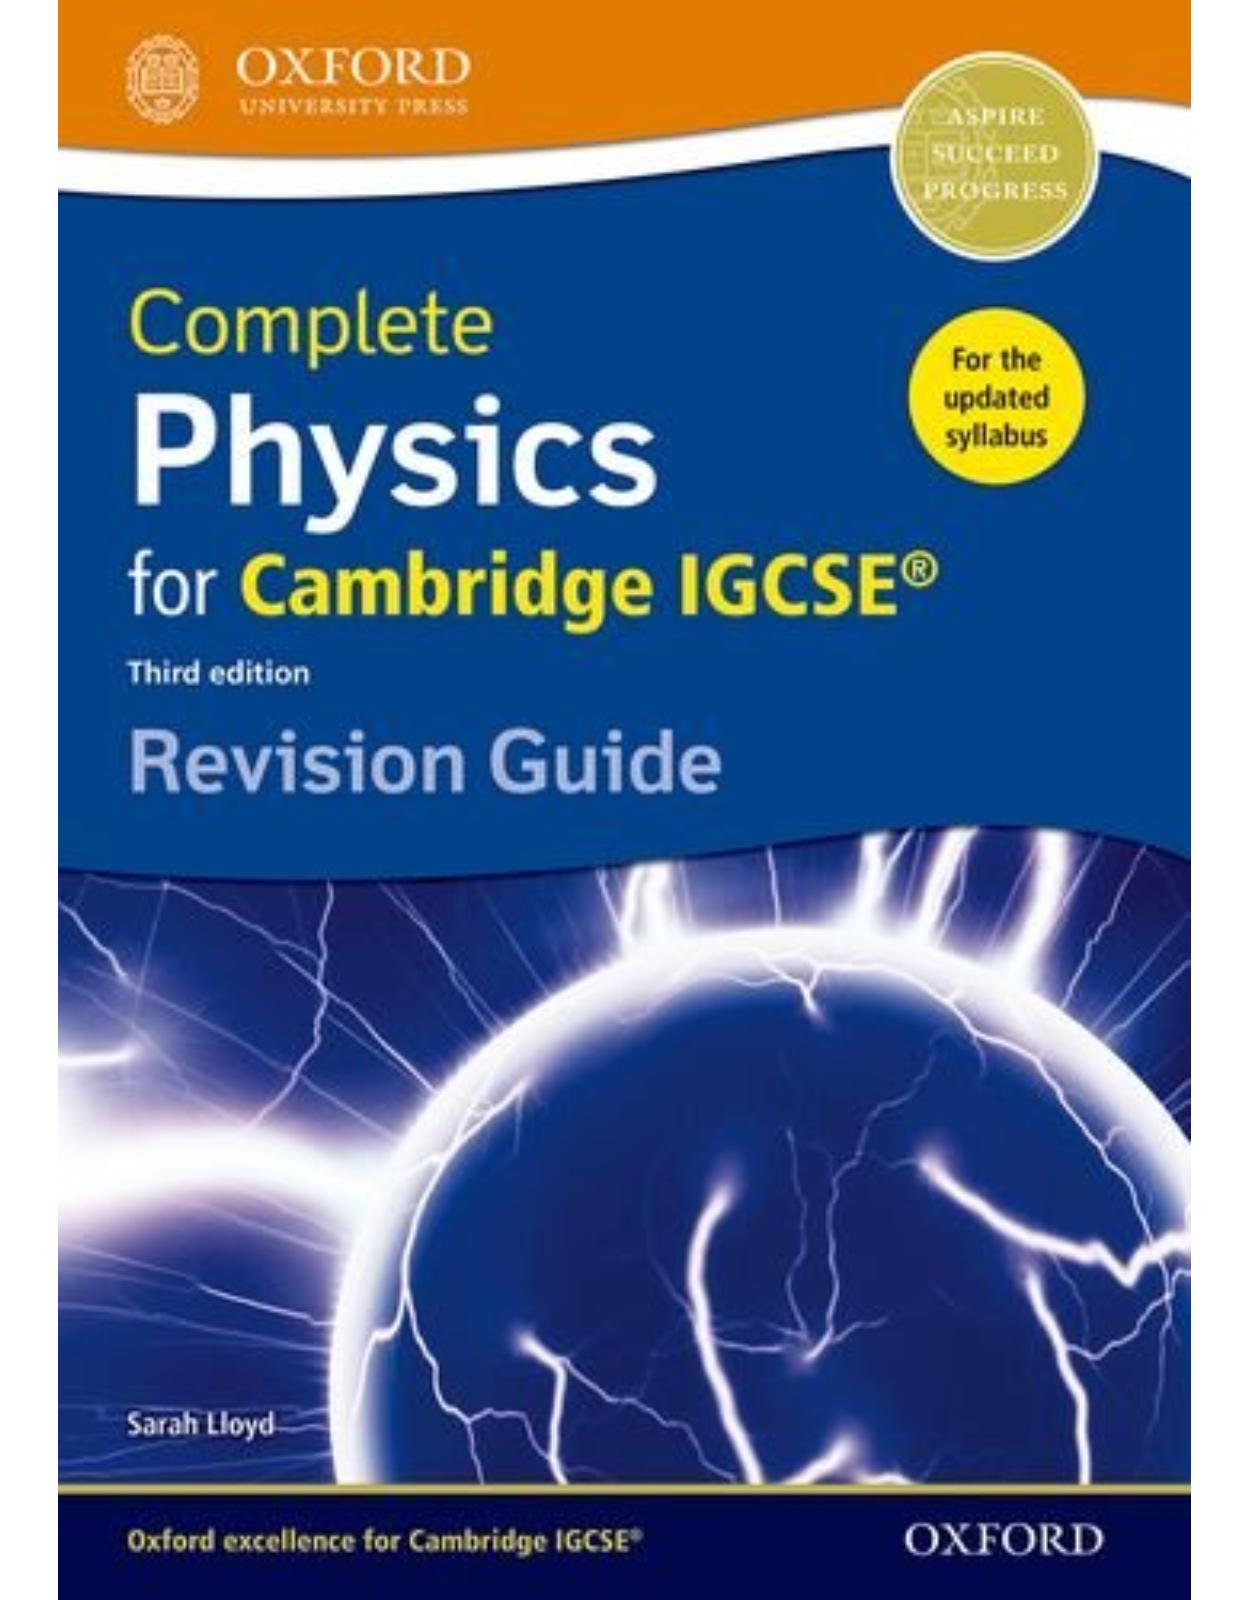 Complete Physics for Cambridge IGCSE ® Revision Guide (Igcse Revision Guides) 